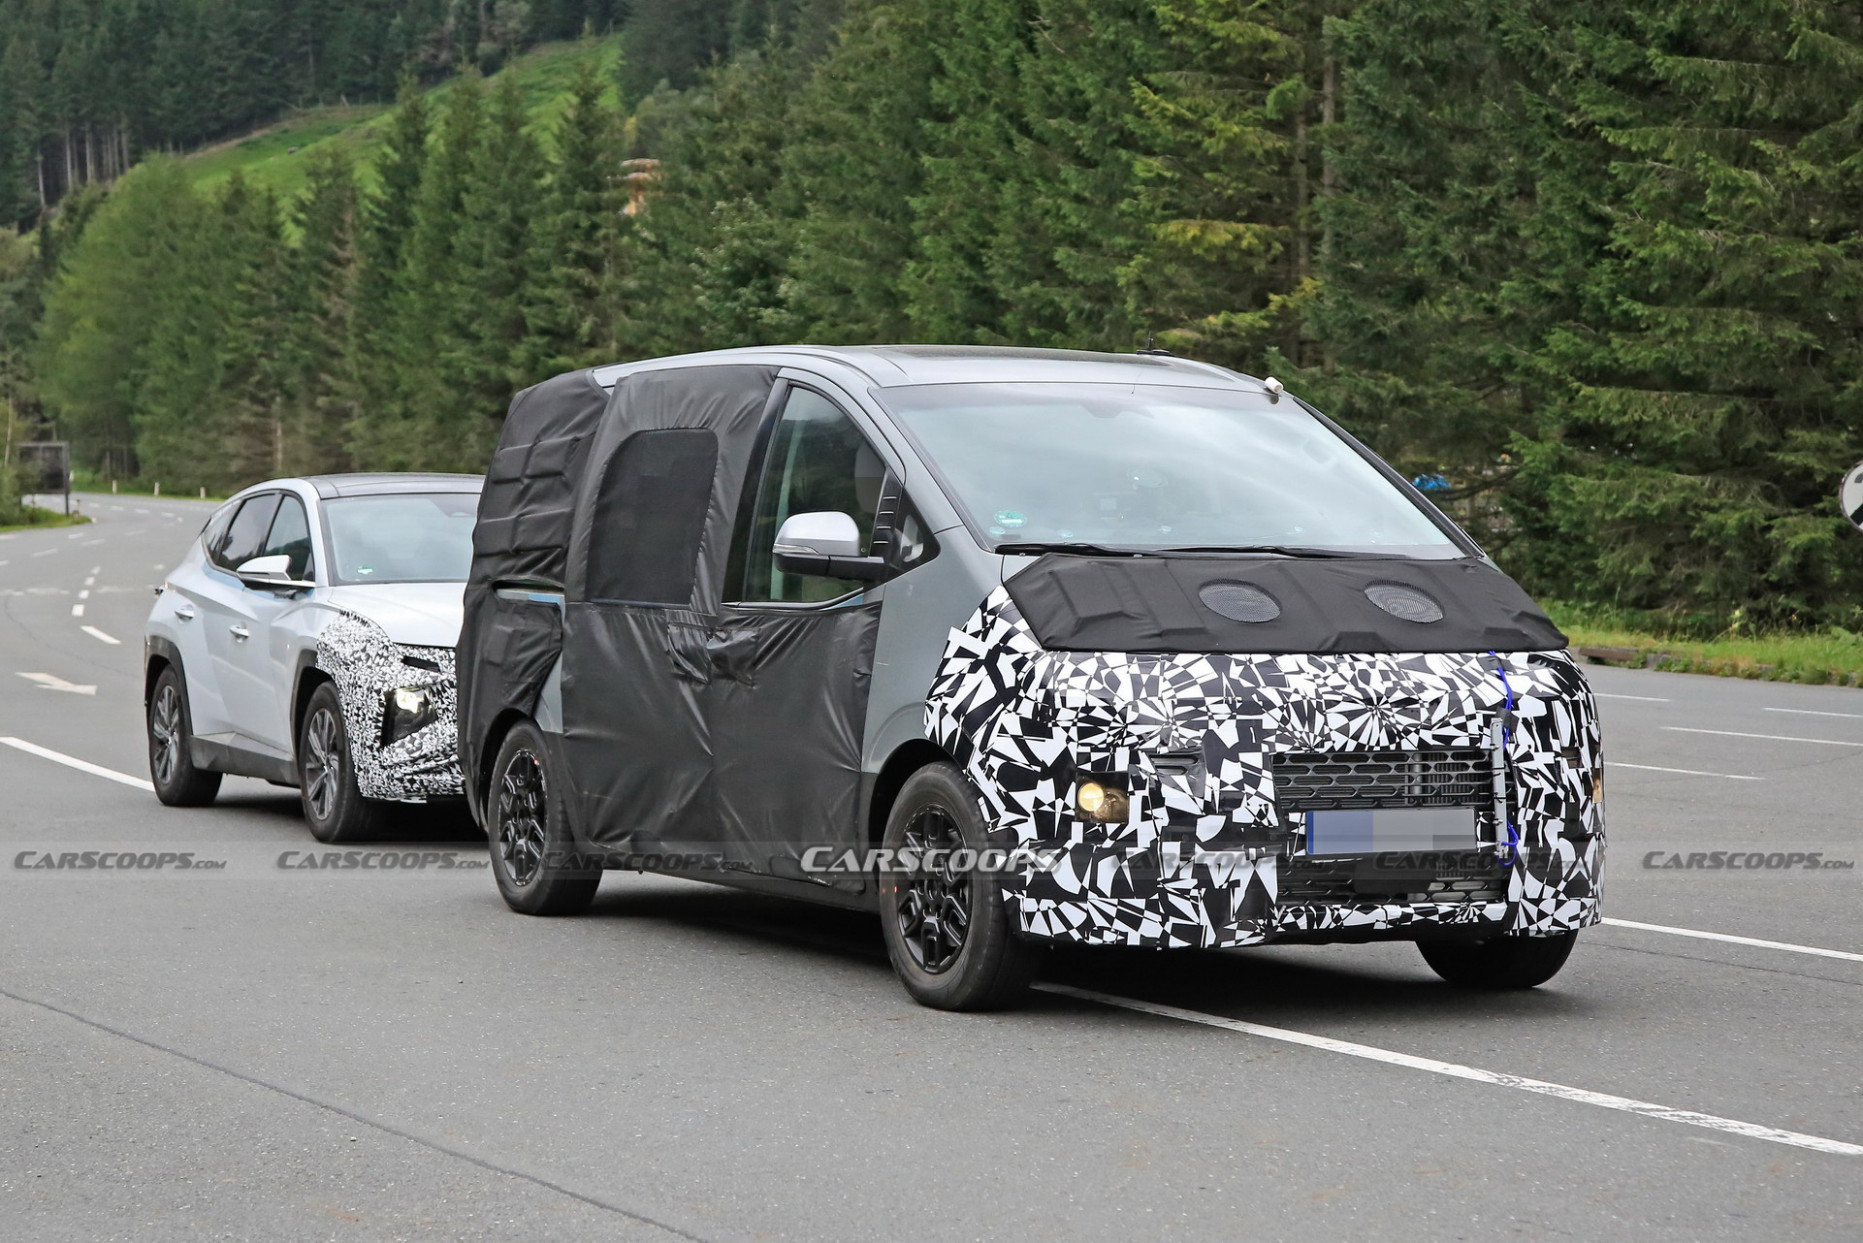 Hyundai's Redesigned 5 H5 (starex / Imax) Spotted, Could Debut Hyundai H1 2023